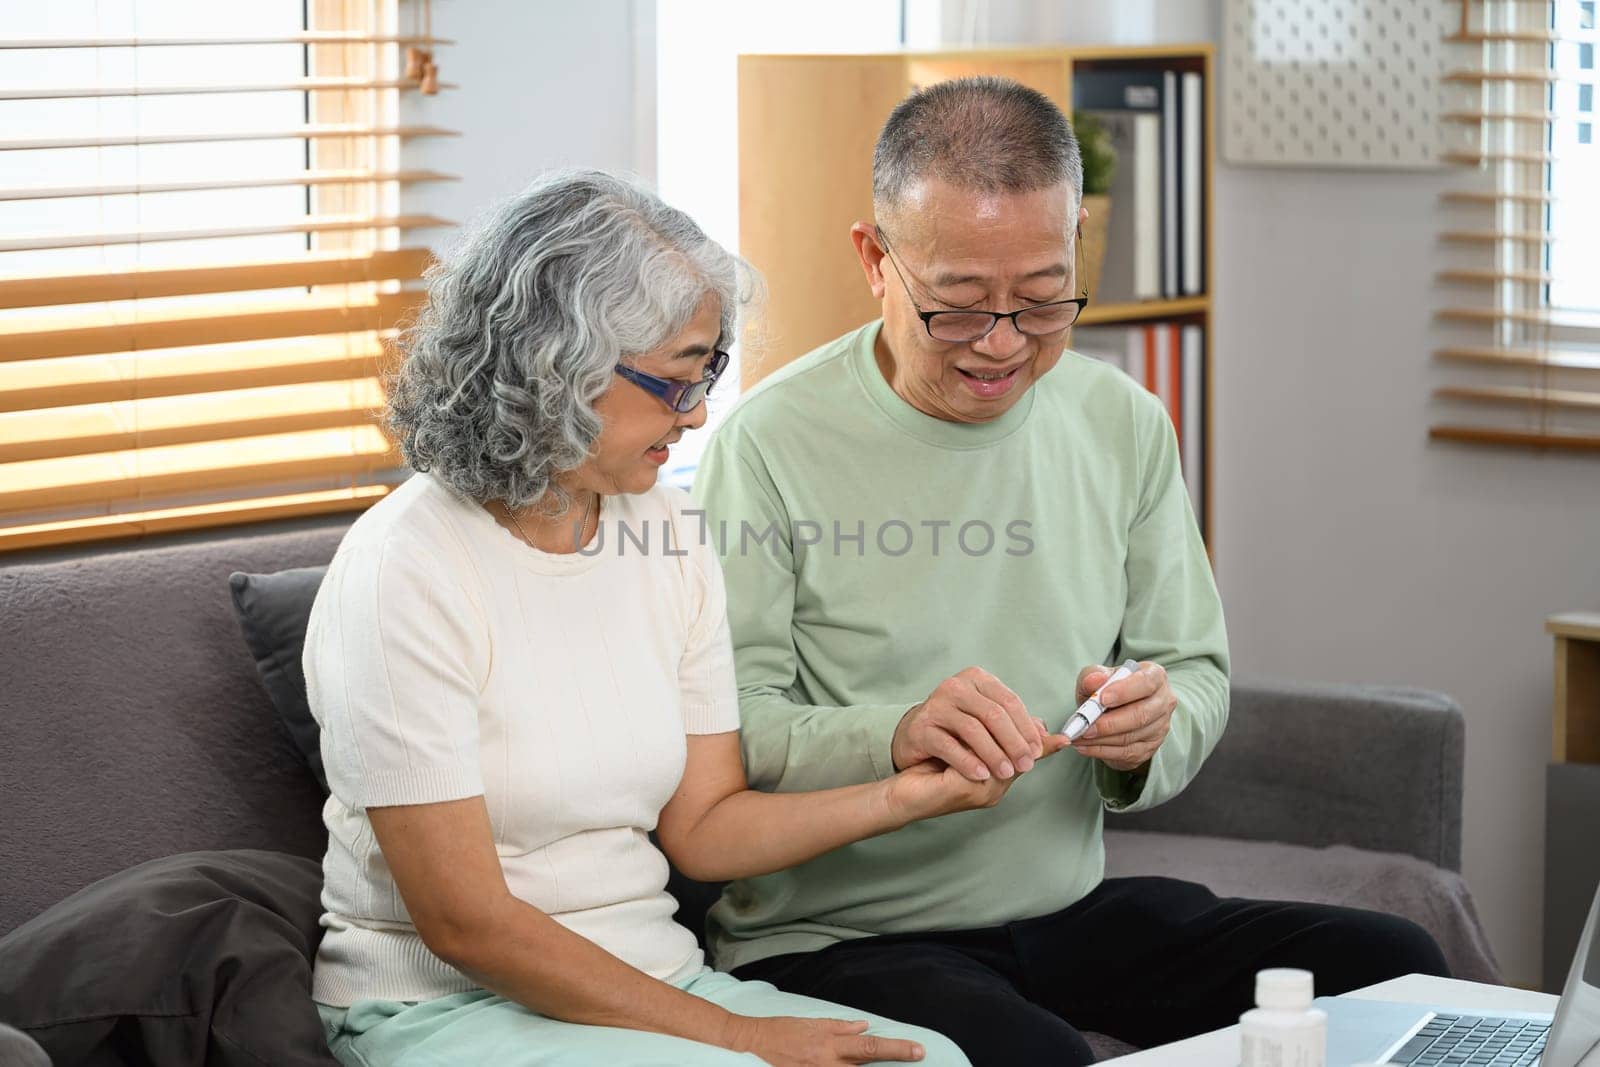 Smiling senior man helping his wife checking blood sugar level at home. Health care concept.